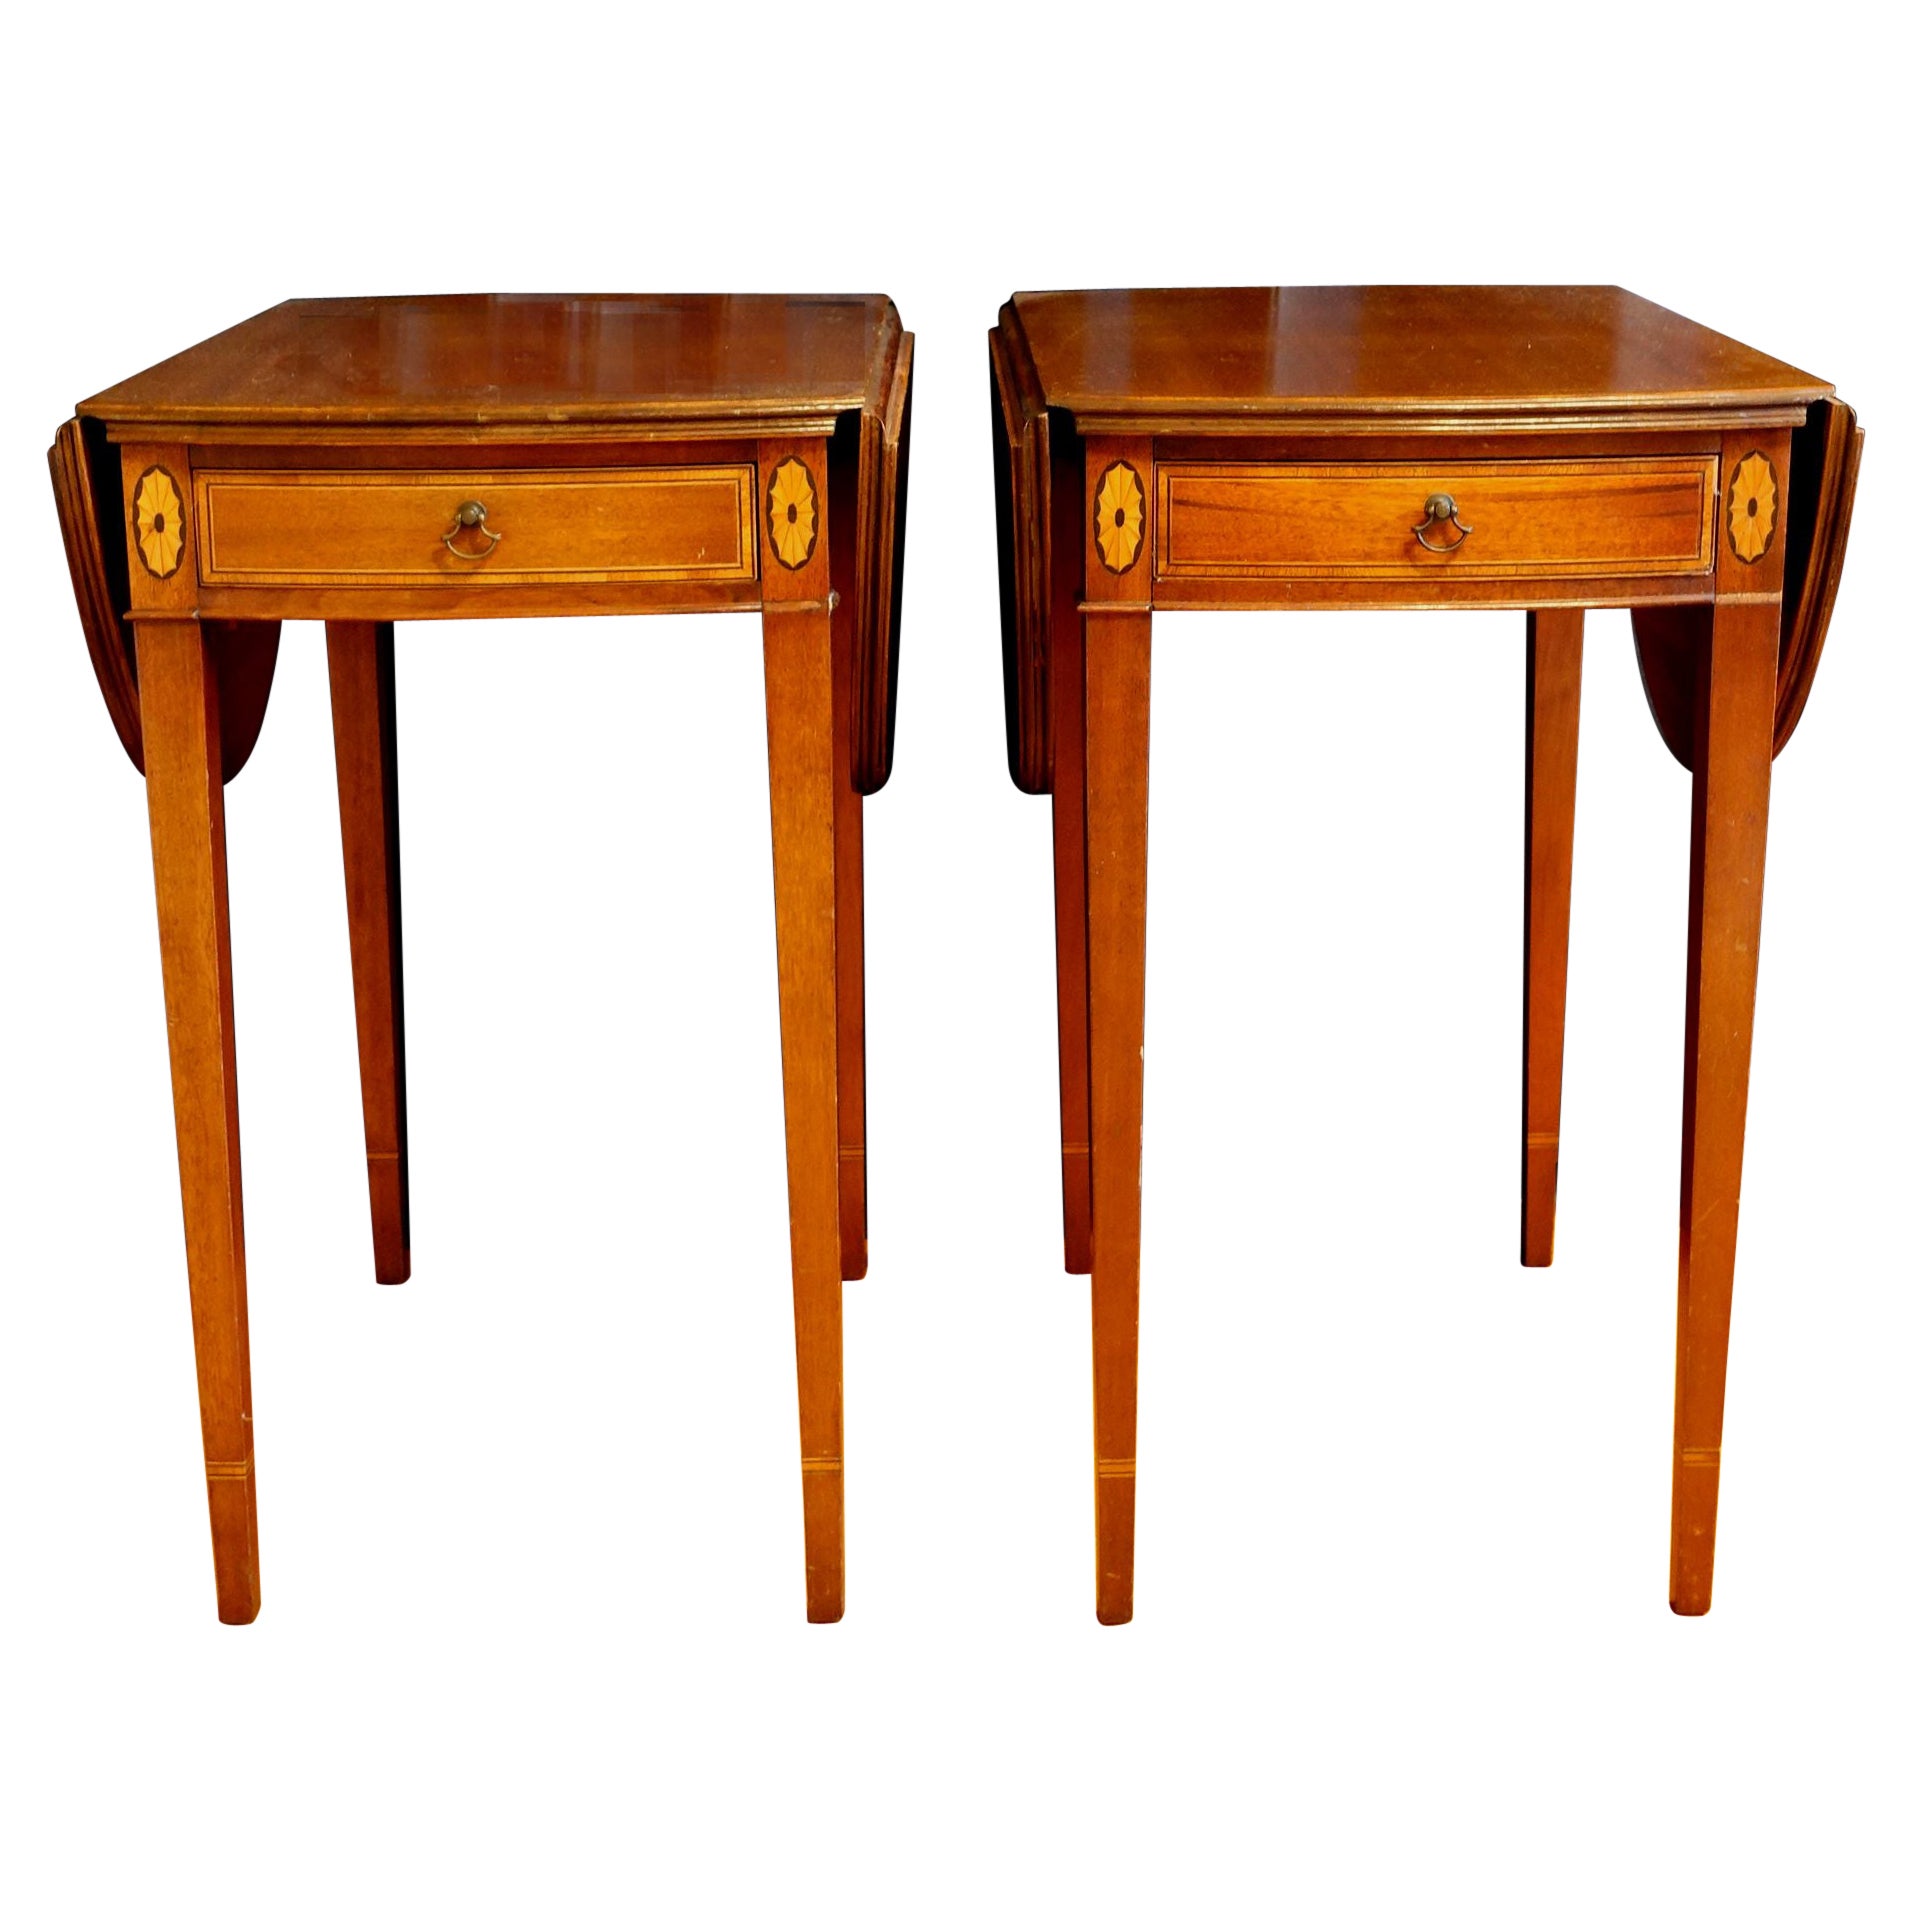 Antique Pair of Mahogany Banded Pembroke Side Tables